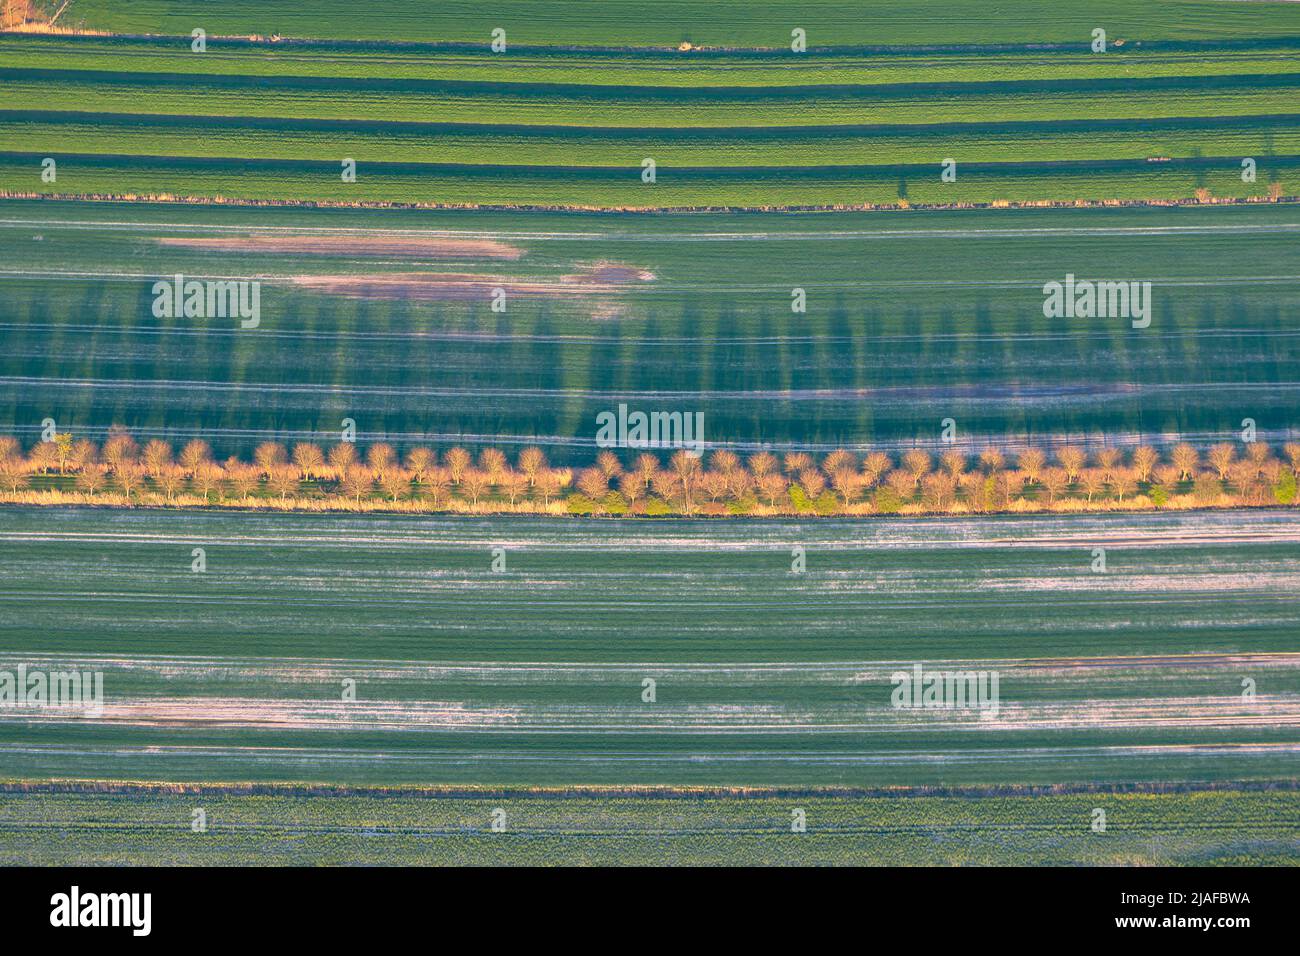 Fruit growing in Kehdingen, 04/18/2022, aerial view, Germany, Lower Saxony Stock Photo